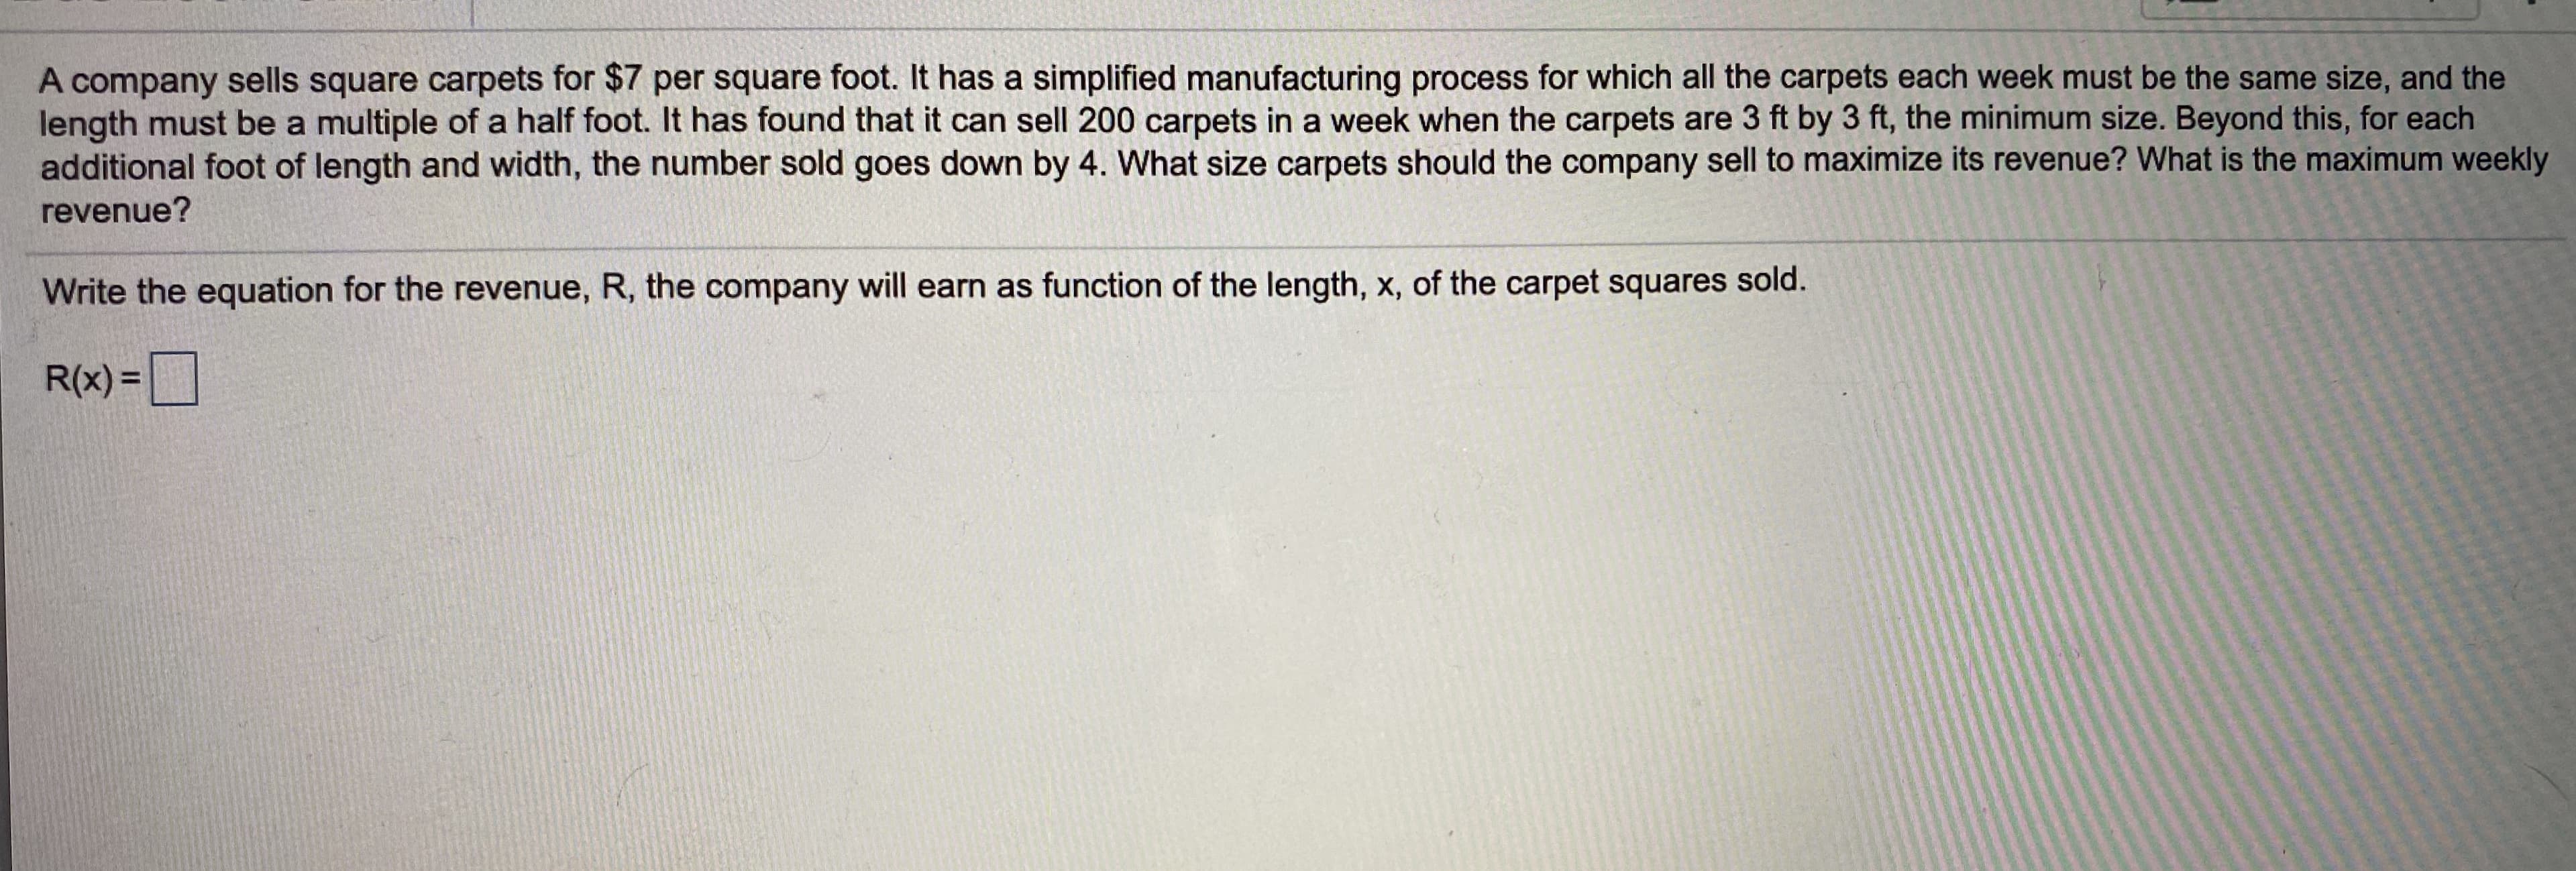 A company sells square carpets for $7 per square foot. It has a simplified manufacturing process for which all the carpets each week must be the same size, and the
length must be a multiple of a half foot. It has found that it can sell 200 carpets in a week when the carpets are 3 ft by 3 ft, the minimum size. Beyond this, for each
additional foot of length and width, the number sold goes down by 4. What size carpets should the company sell to maximize its revenue? What is the maximum weekly
revenue?
Write the equation for the revenue, R, the company will earn as function of the length, x, of the carpet squares sold.
R(x) =
